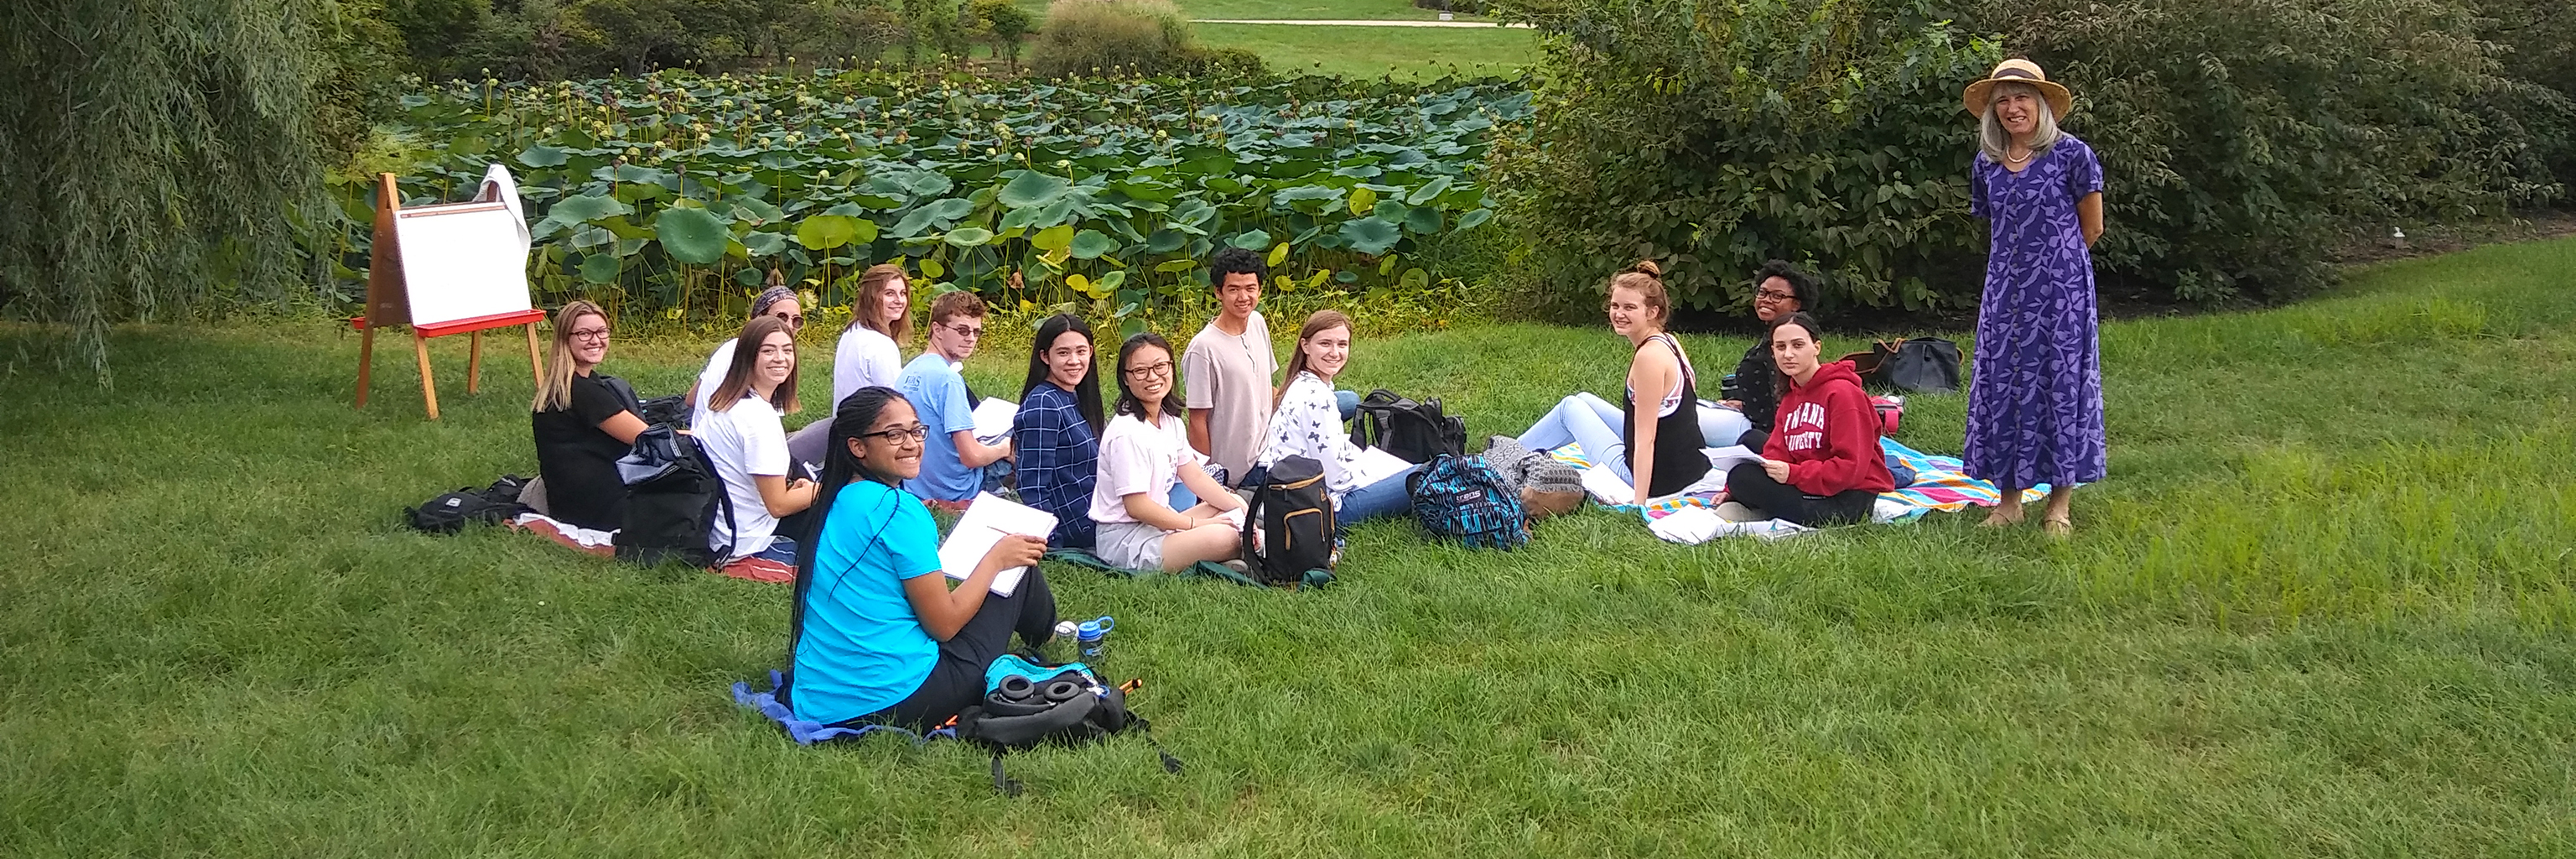 Image of French class meeting outside on the picturesque Indiana University lawn.